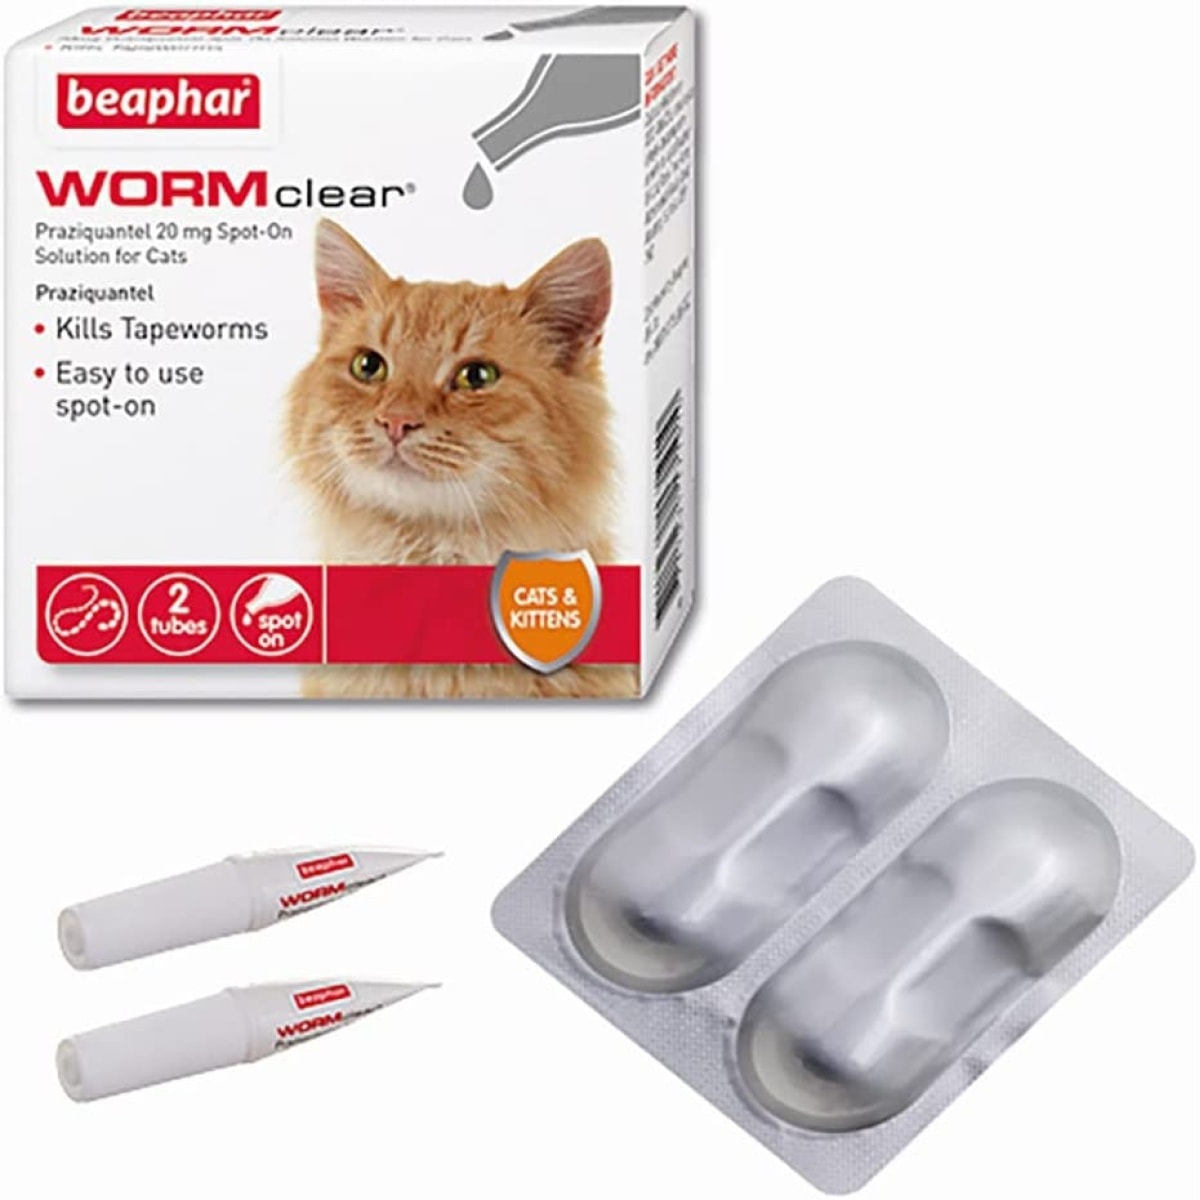 Beaphar - Wormclear Spot on for Cats (2 Pipettes) Main Image